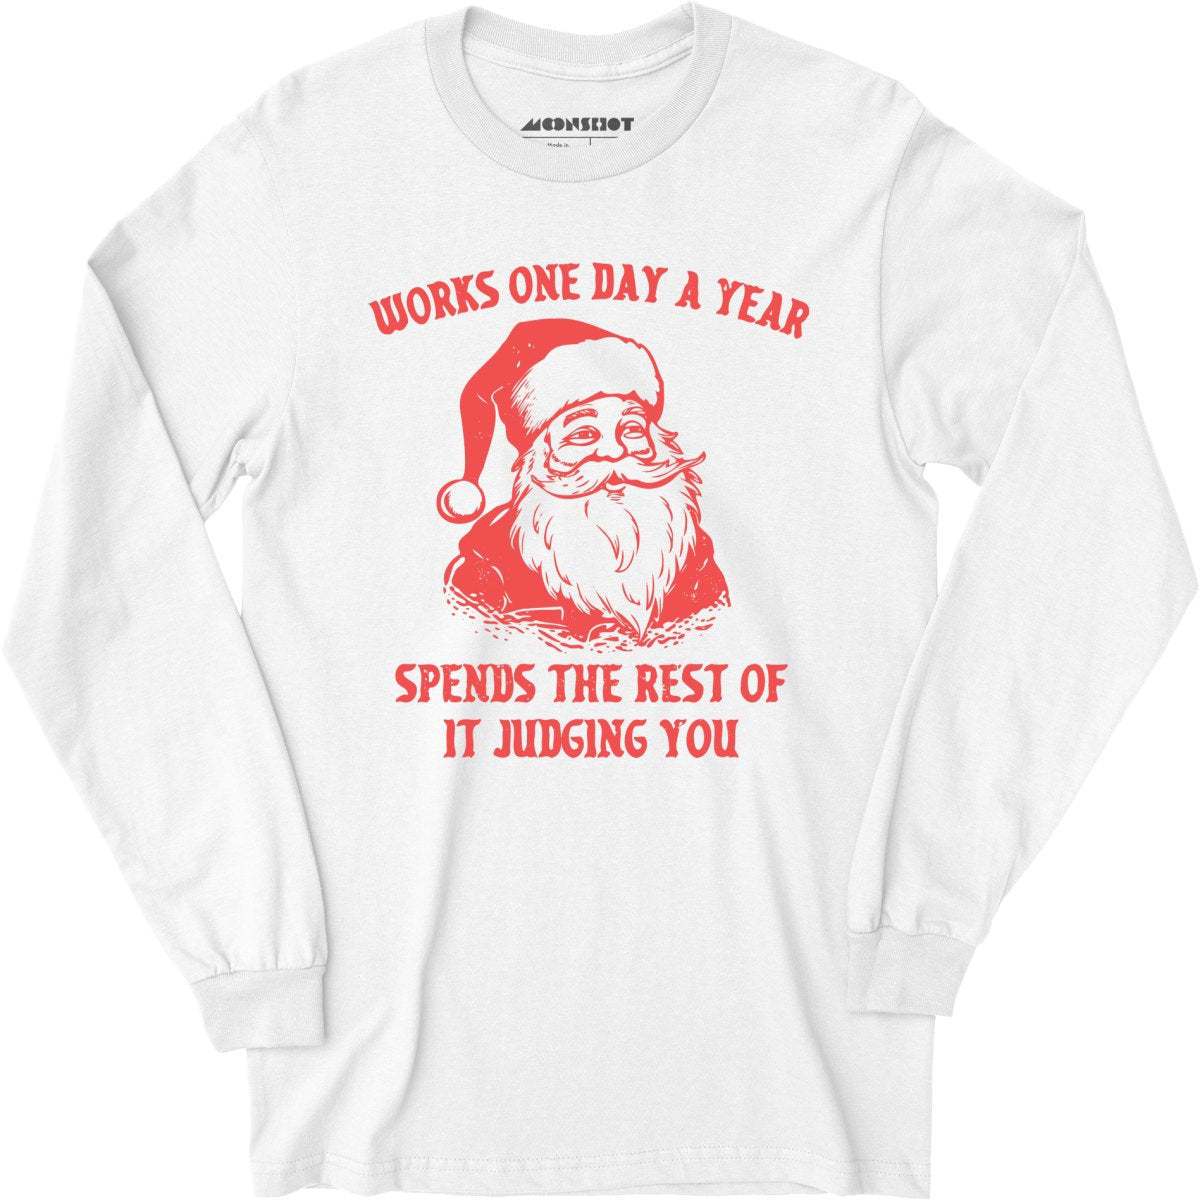 Works One Day a Year - Long Sleeve T-Shirt